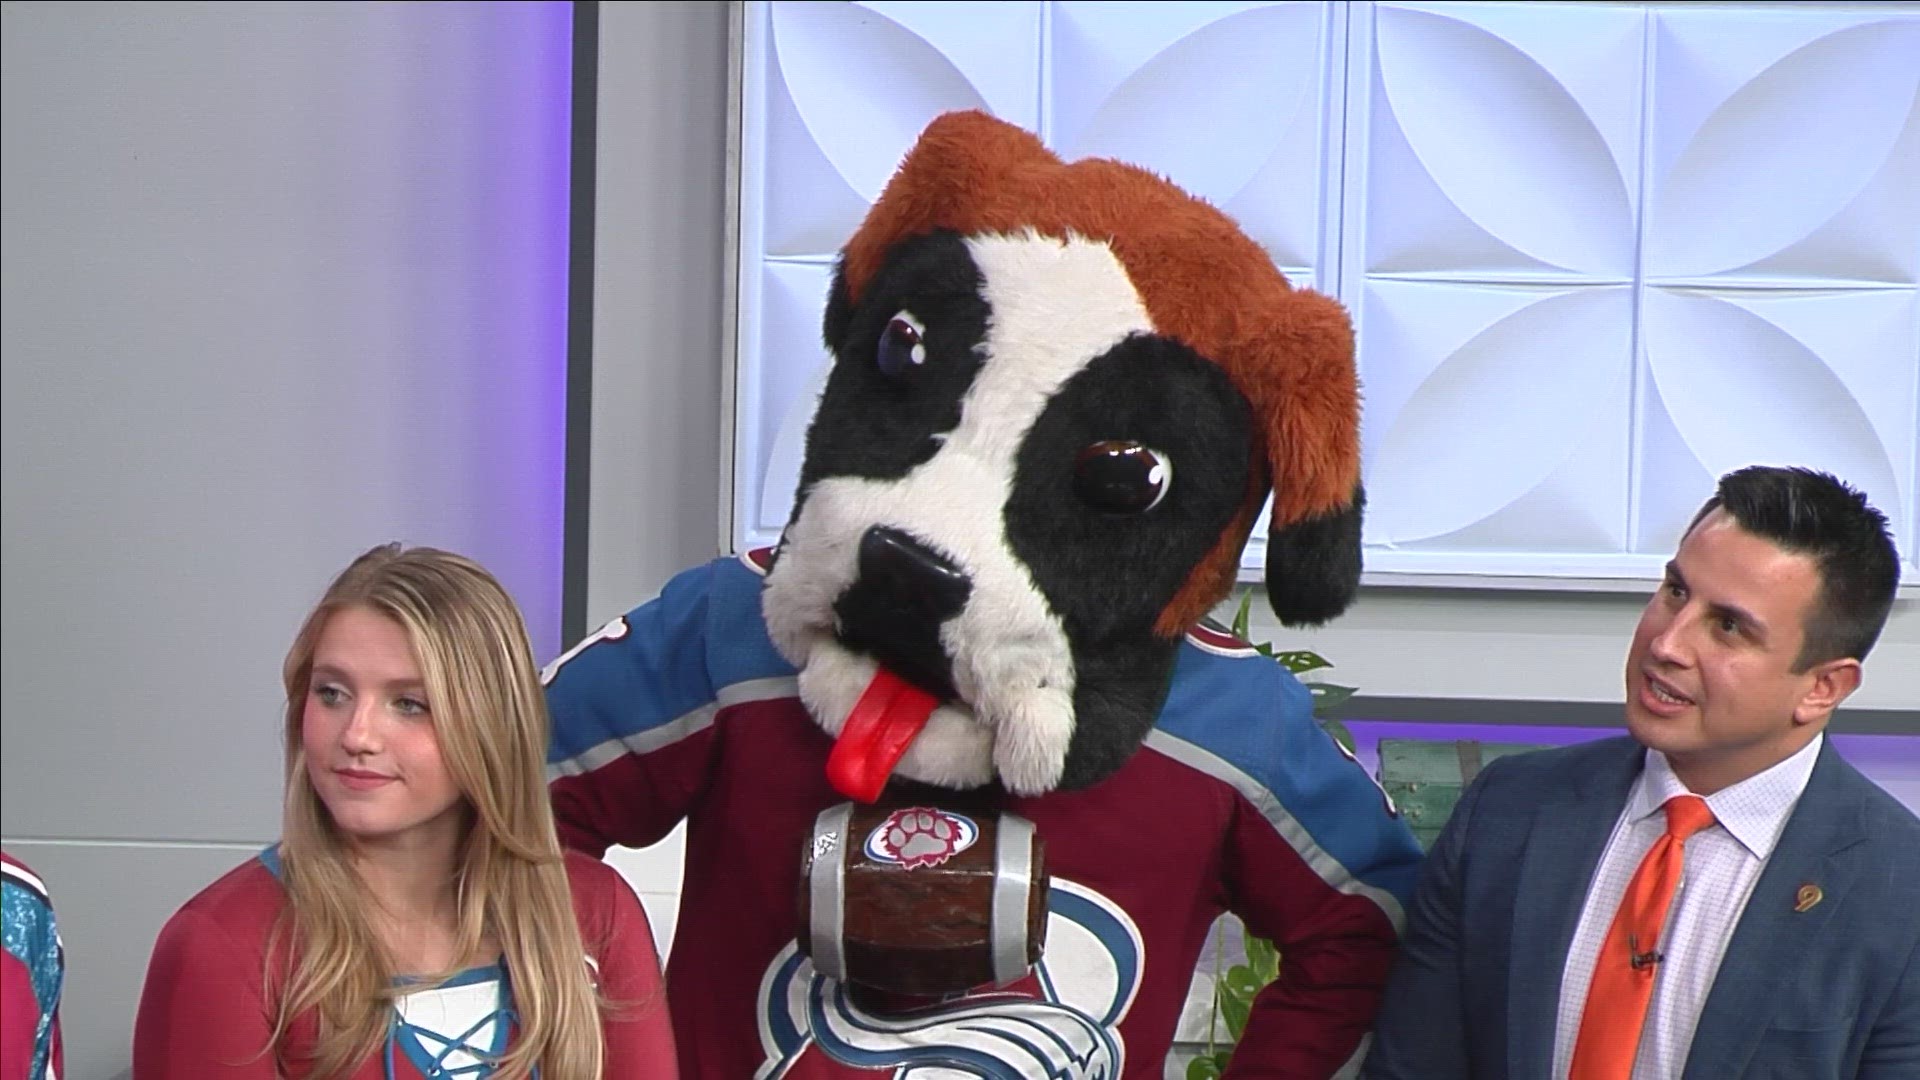 The Avs have one more game before it's time for the Stanley Cup playoffs! Ice Patrol, mascot Bernie and announcer Conor McGahey discuss what's in store for fans.